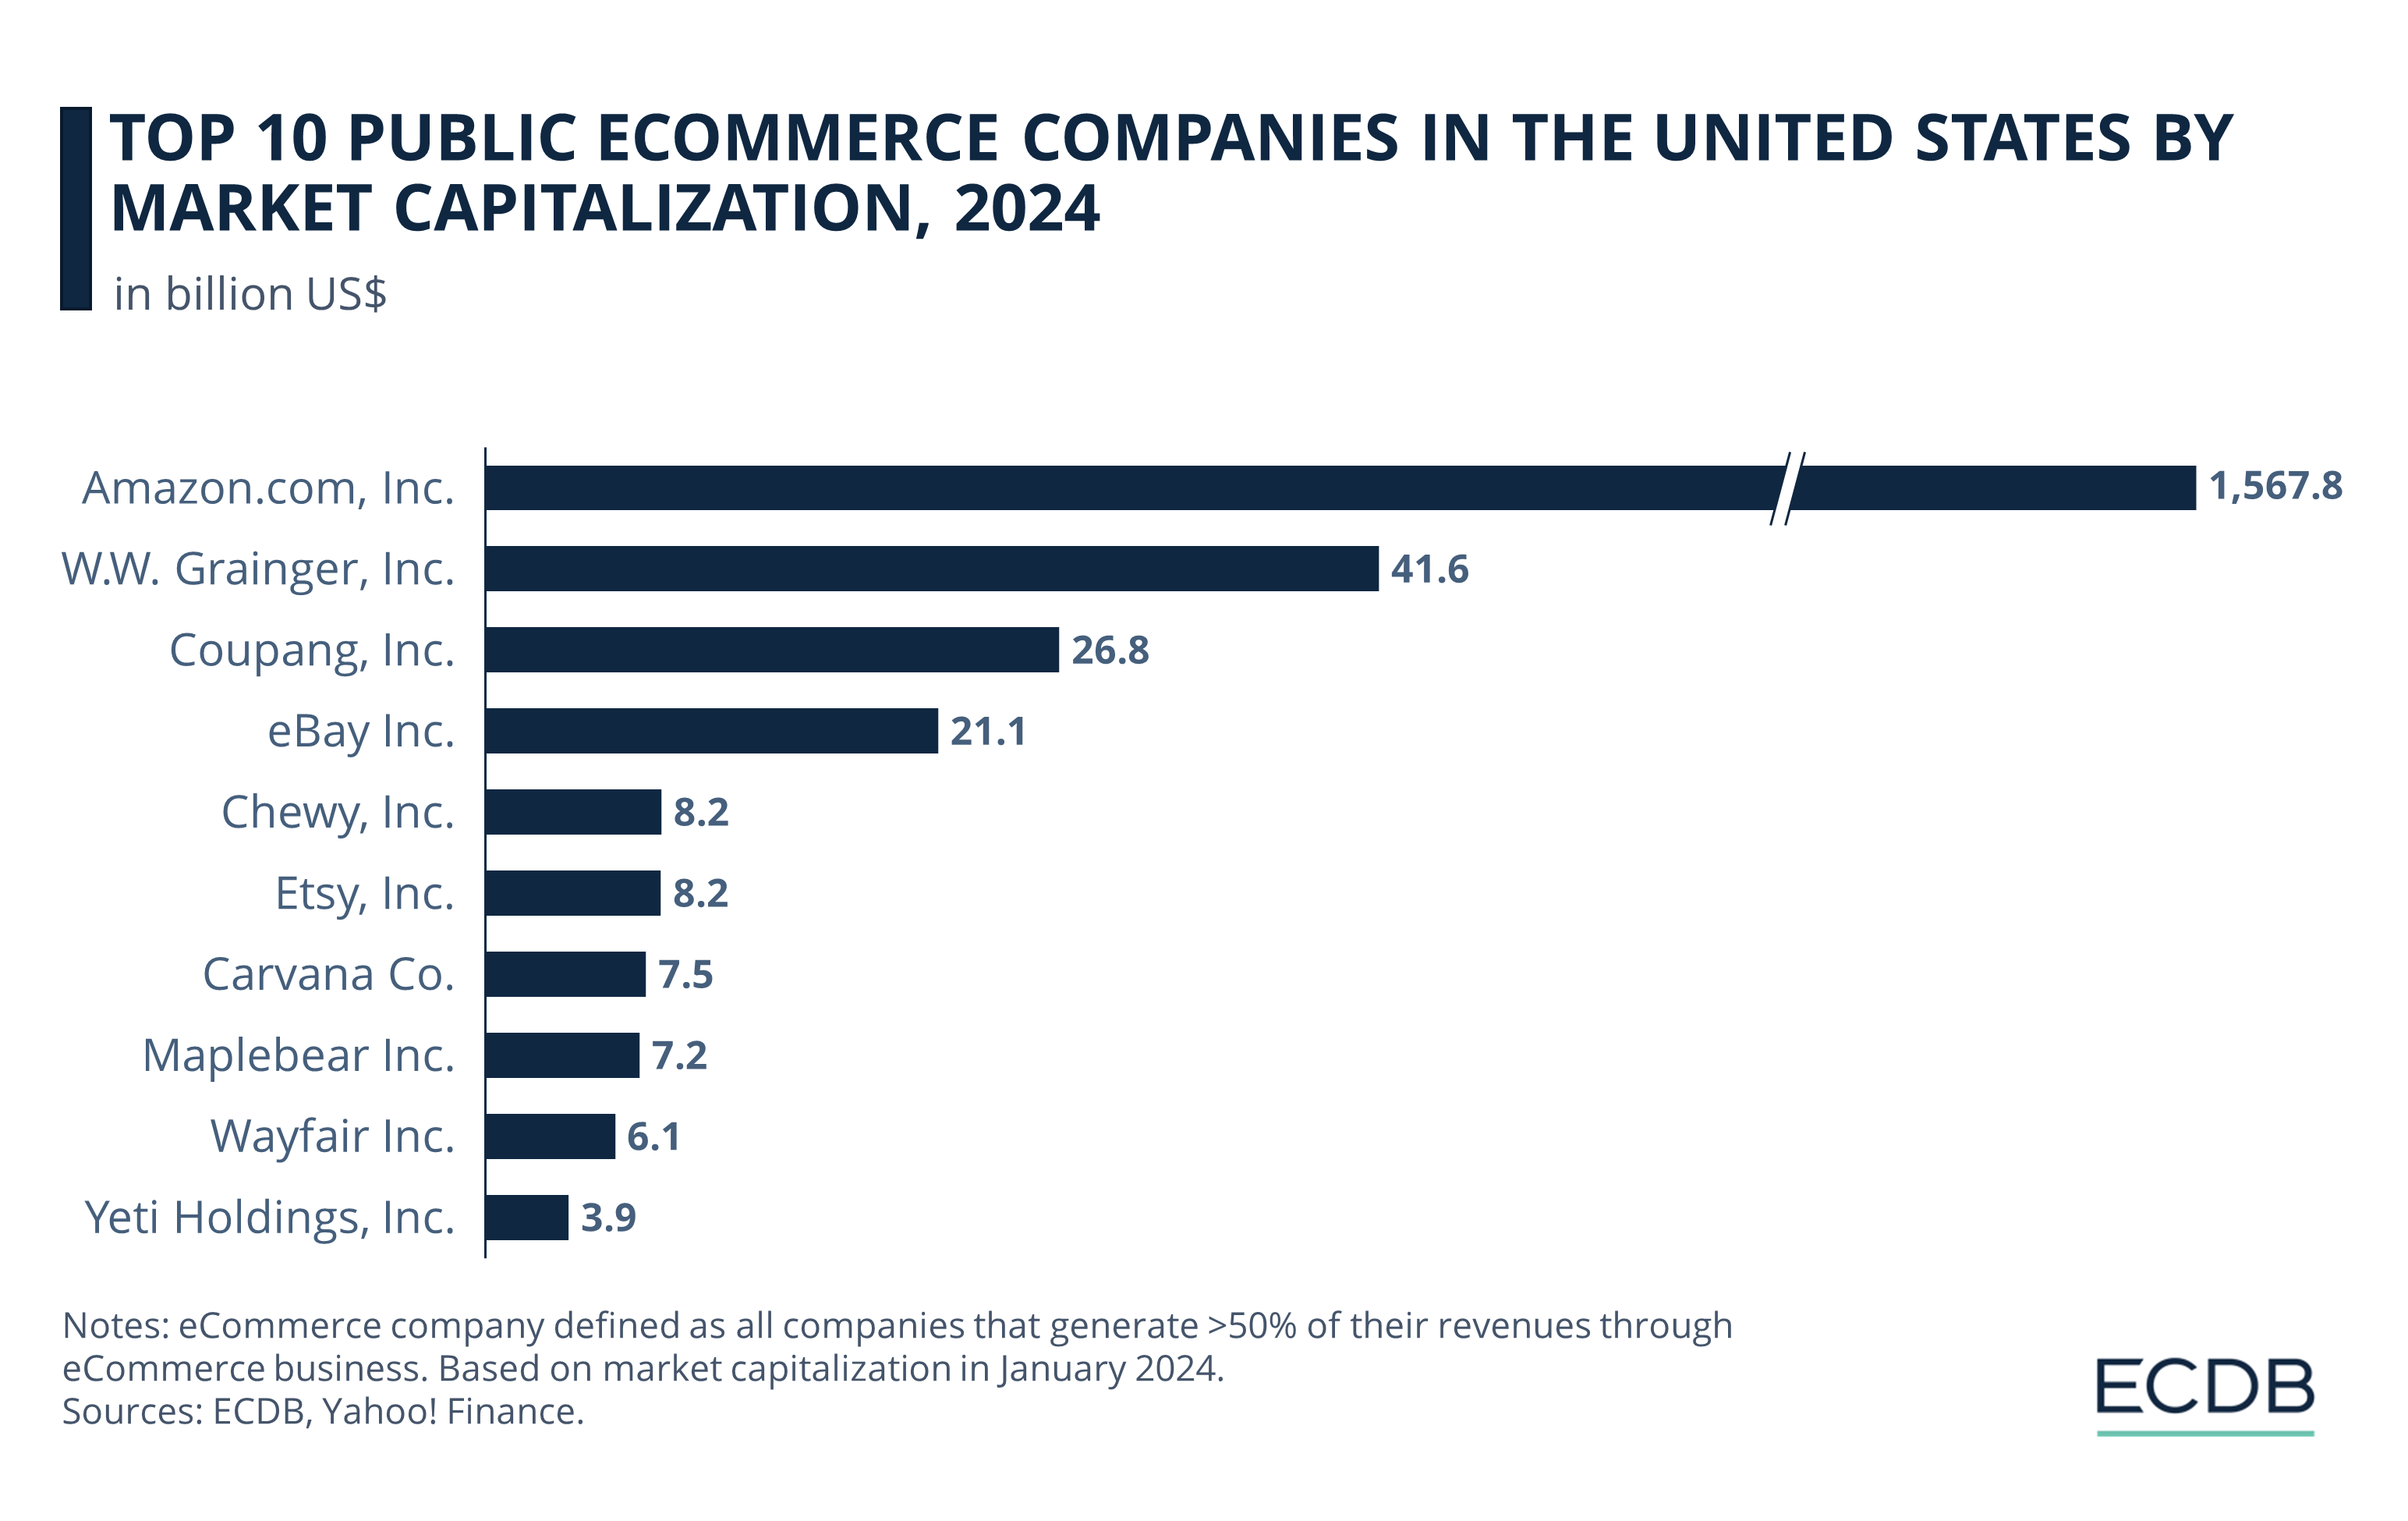 Top 10 Public eCommerce Companies in the United States by Market Capitalization, 2024